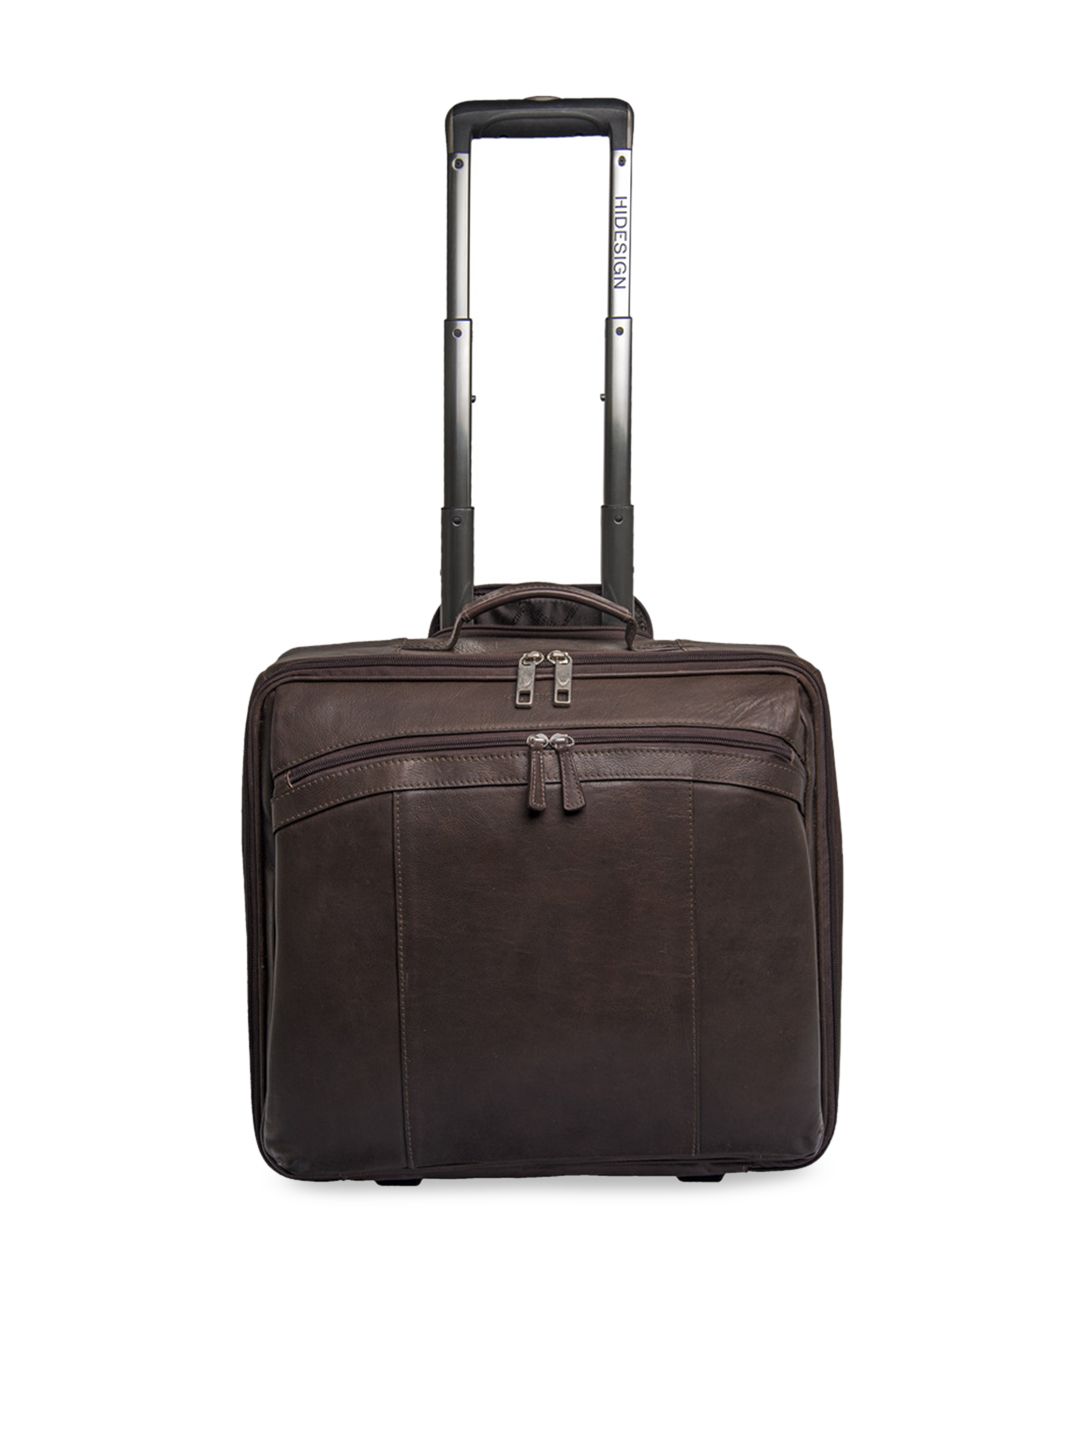 Hidesign Unisex Coffee Brown Solid Leather Cabin Trolley Suitcase Price in India